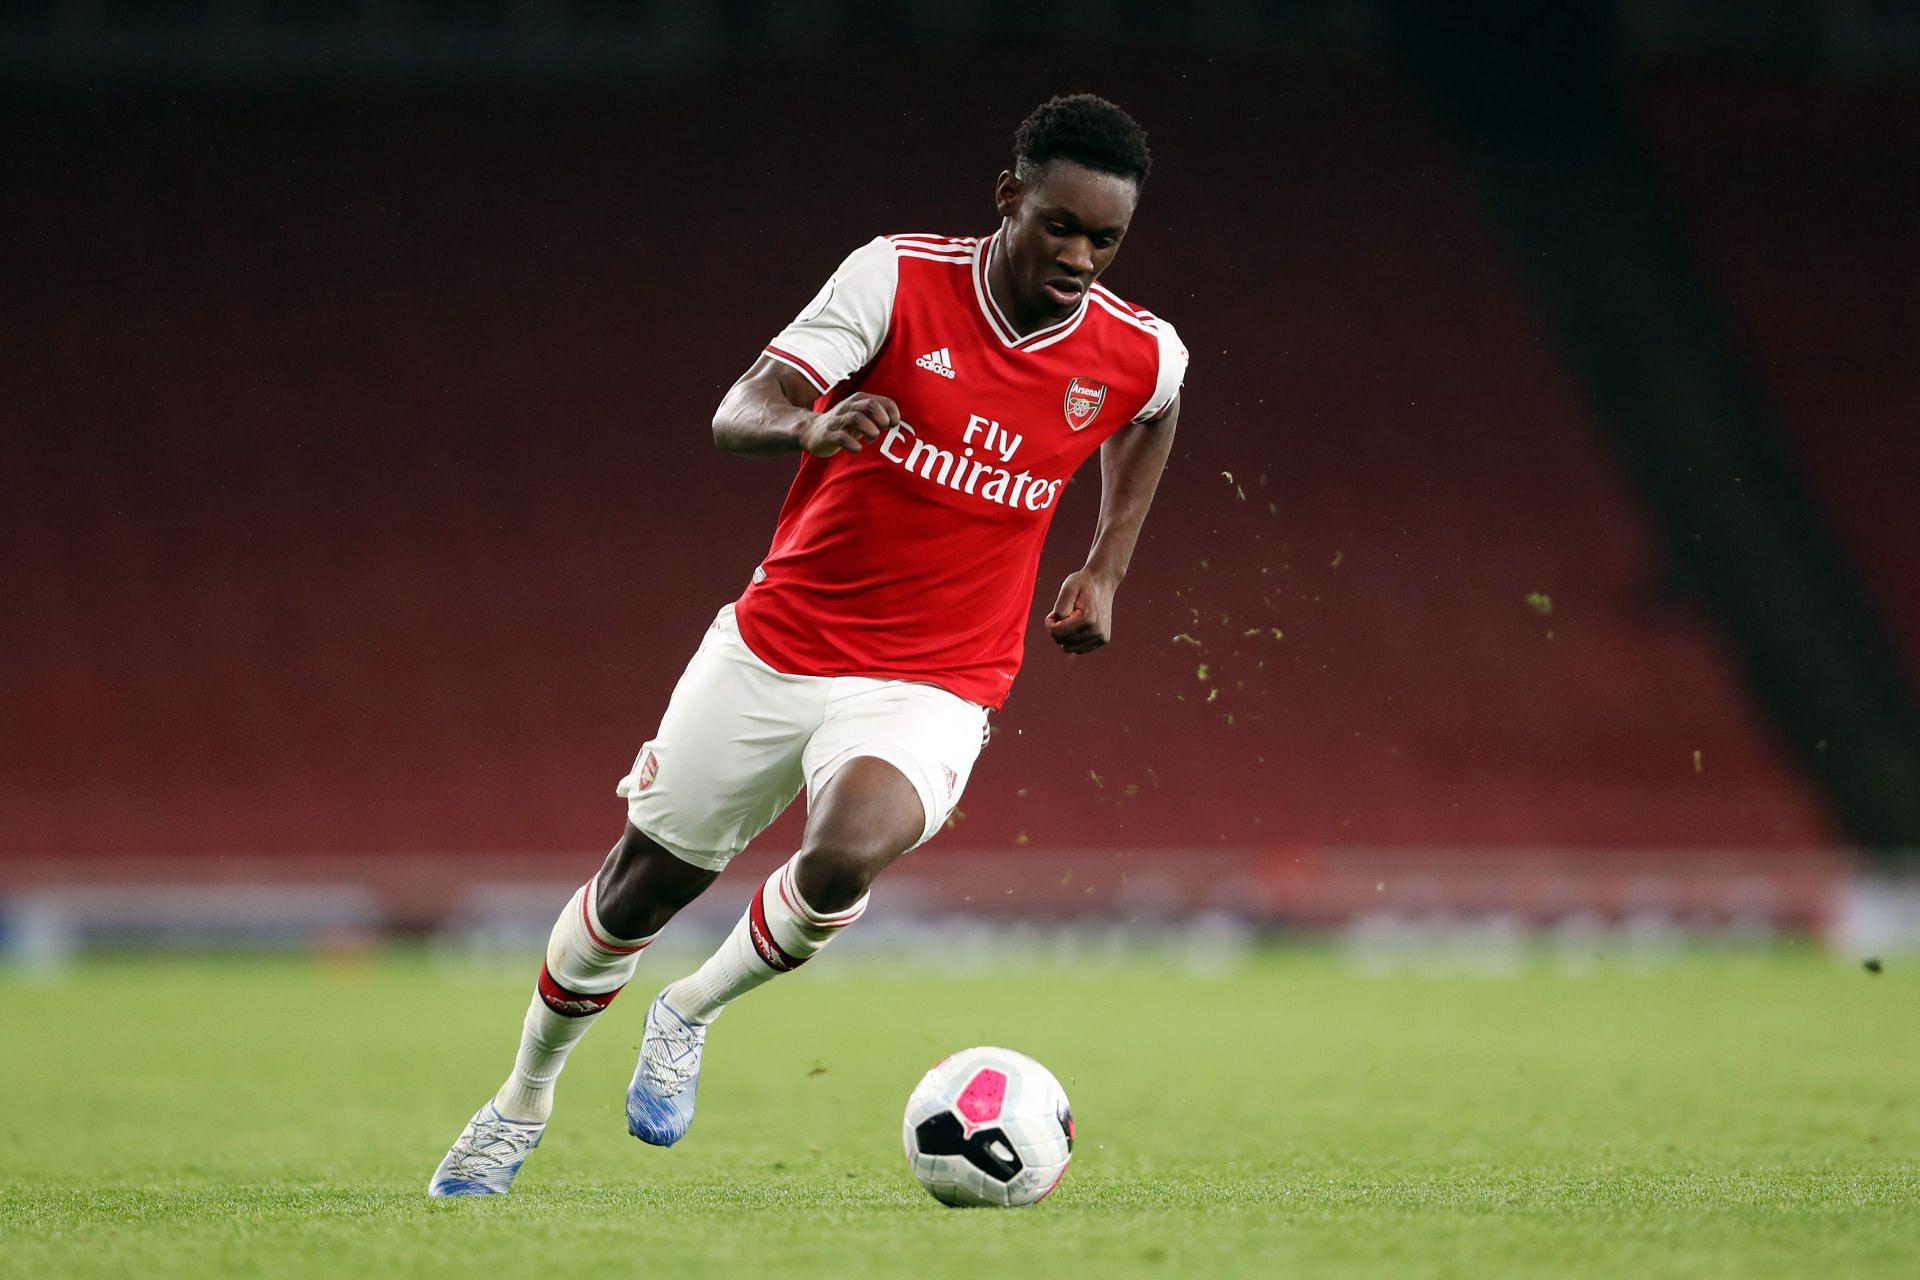 Folarin Balogun is lauded as one of the future prospects at the Emirates Stadium